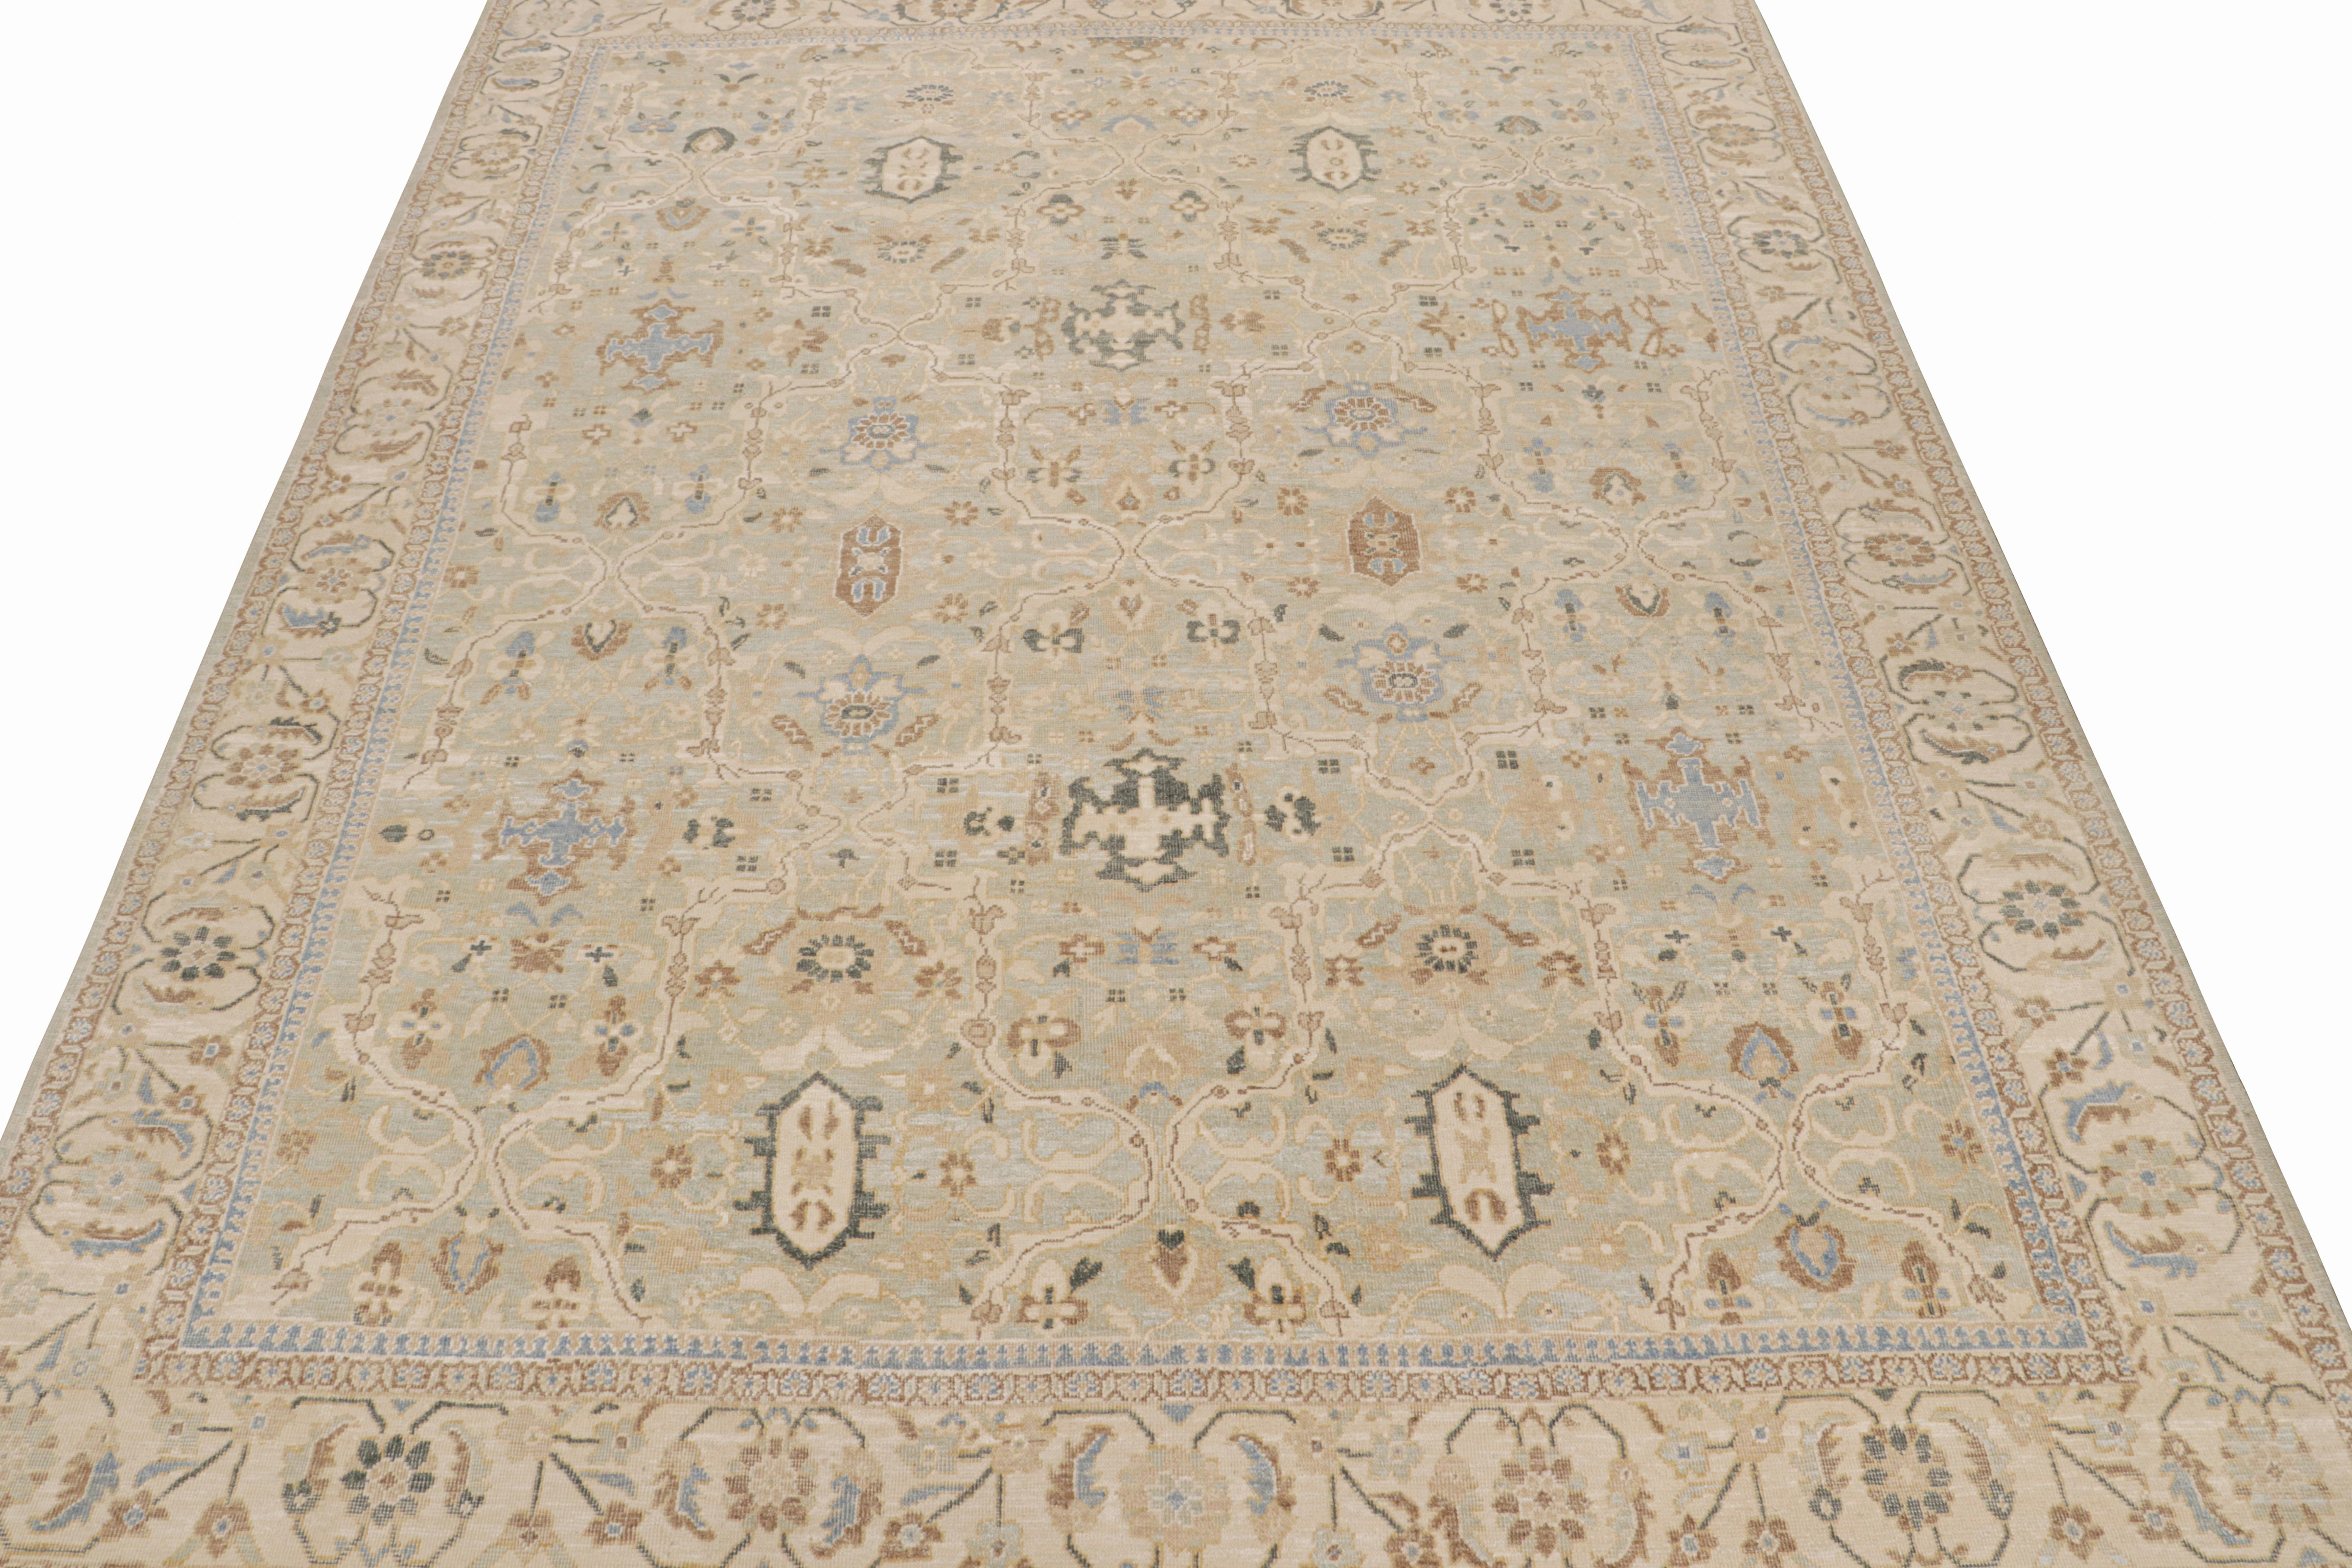 Indian Rug & Kilim’s Oushak Style Rug in Blue and Beige-Brown Floral Patterns For Sale